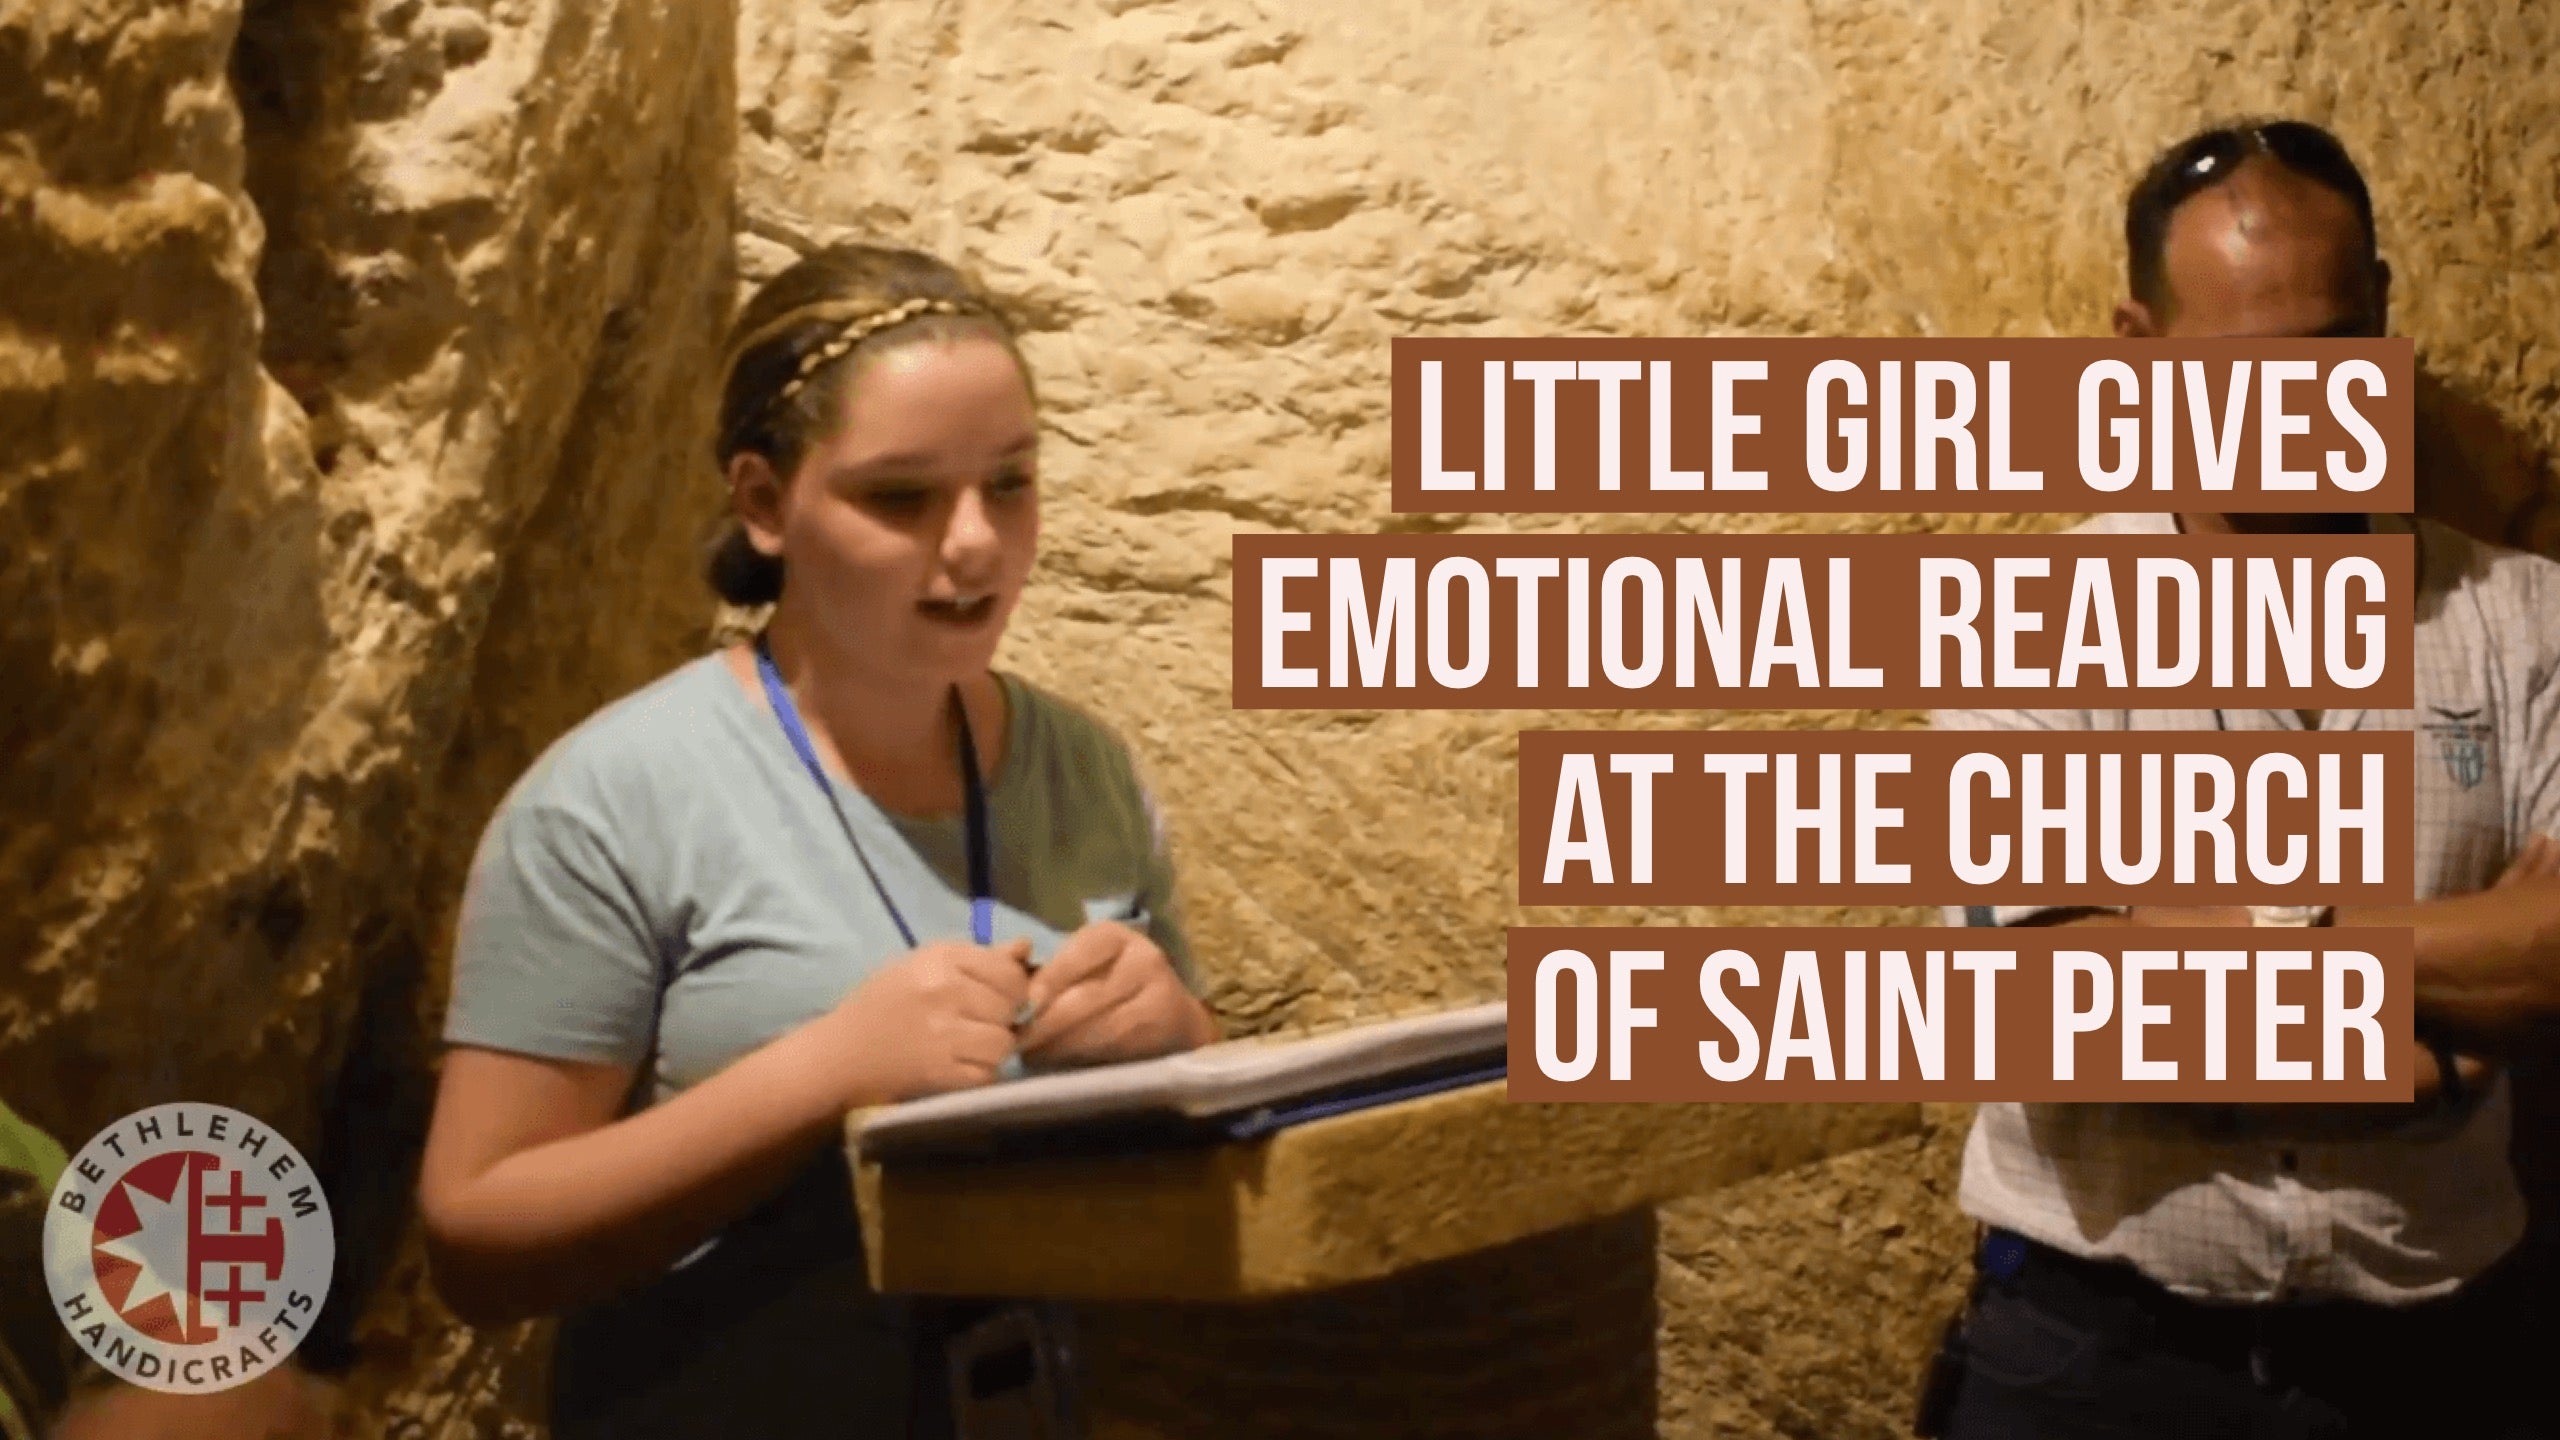 Little Girl Gives Emotional Reading at the Church of Saint Peter